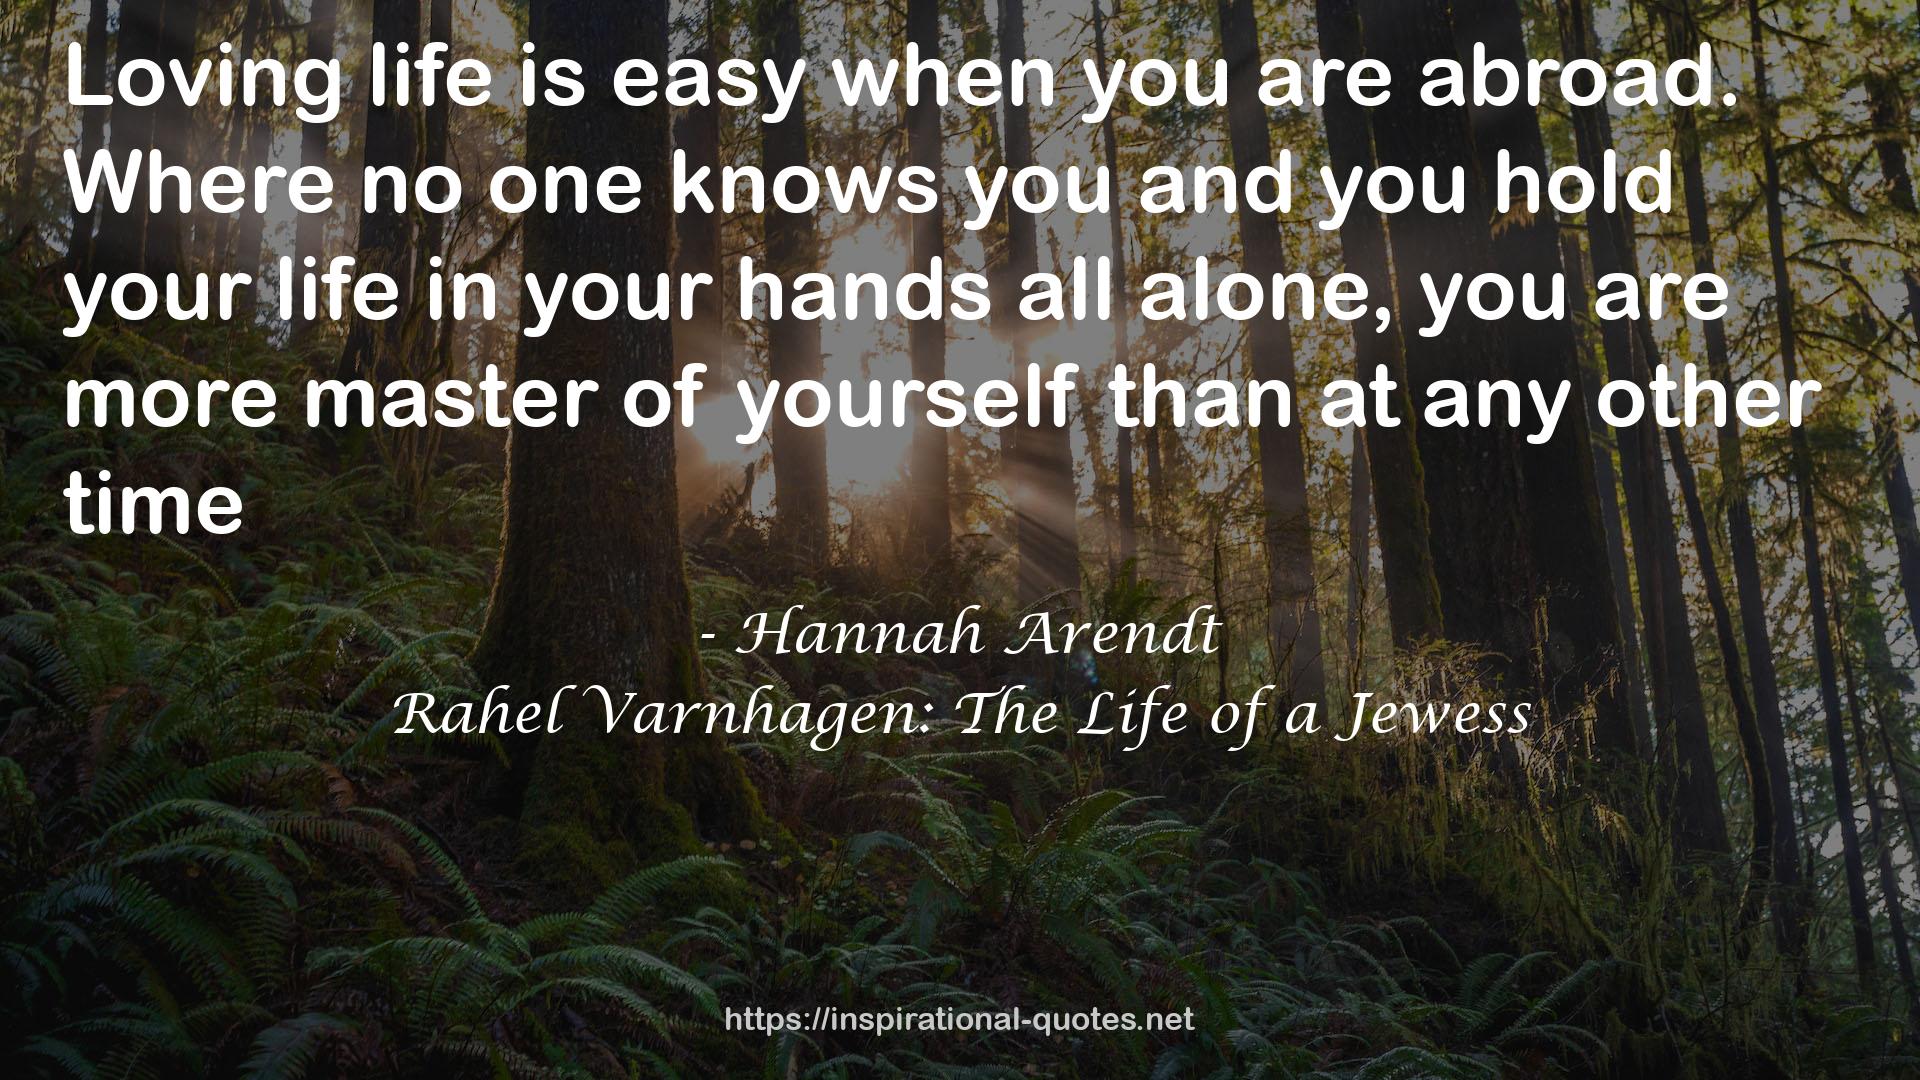 Rahel Varnhagen: The Life of a Jewess QUOTES